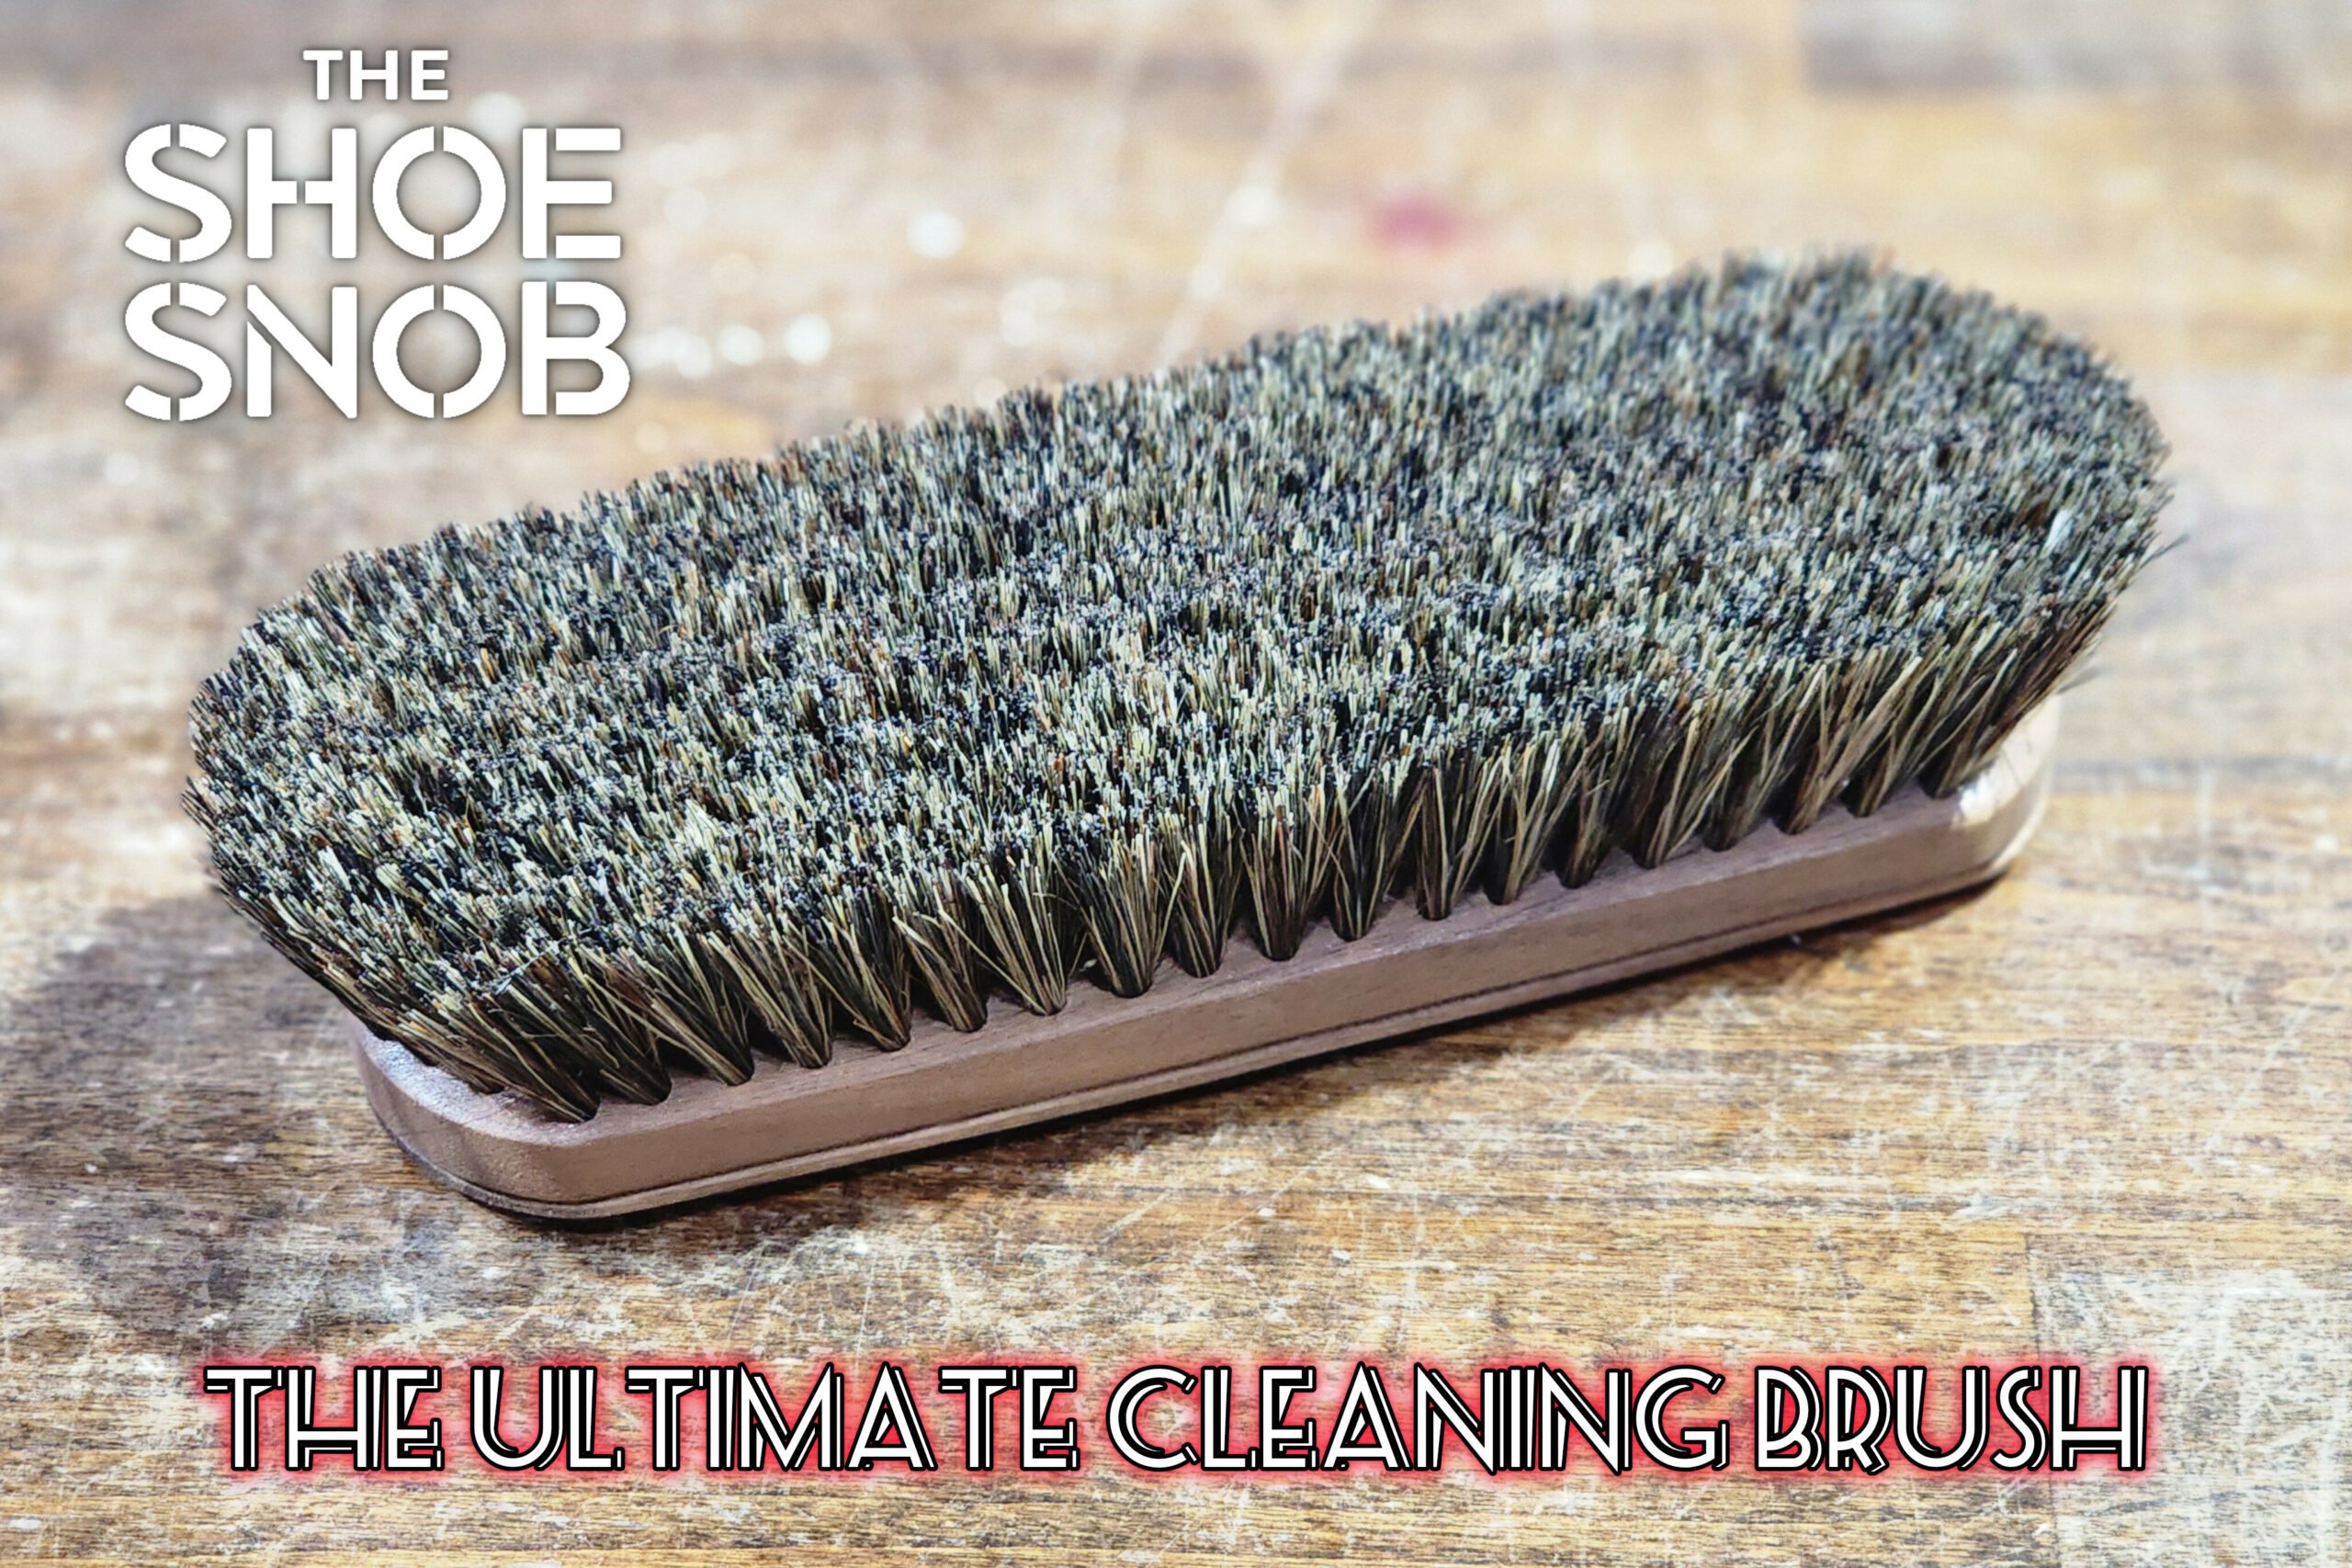 The Ultimate Cleaning Shoe Brush